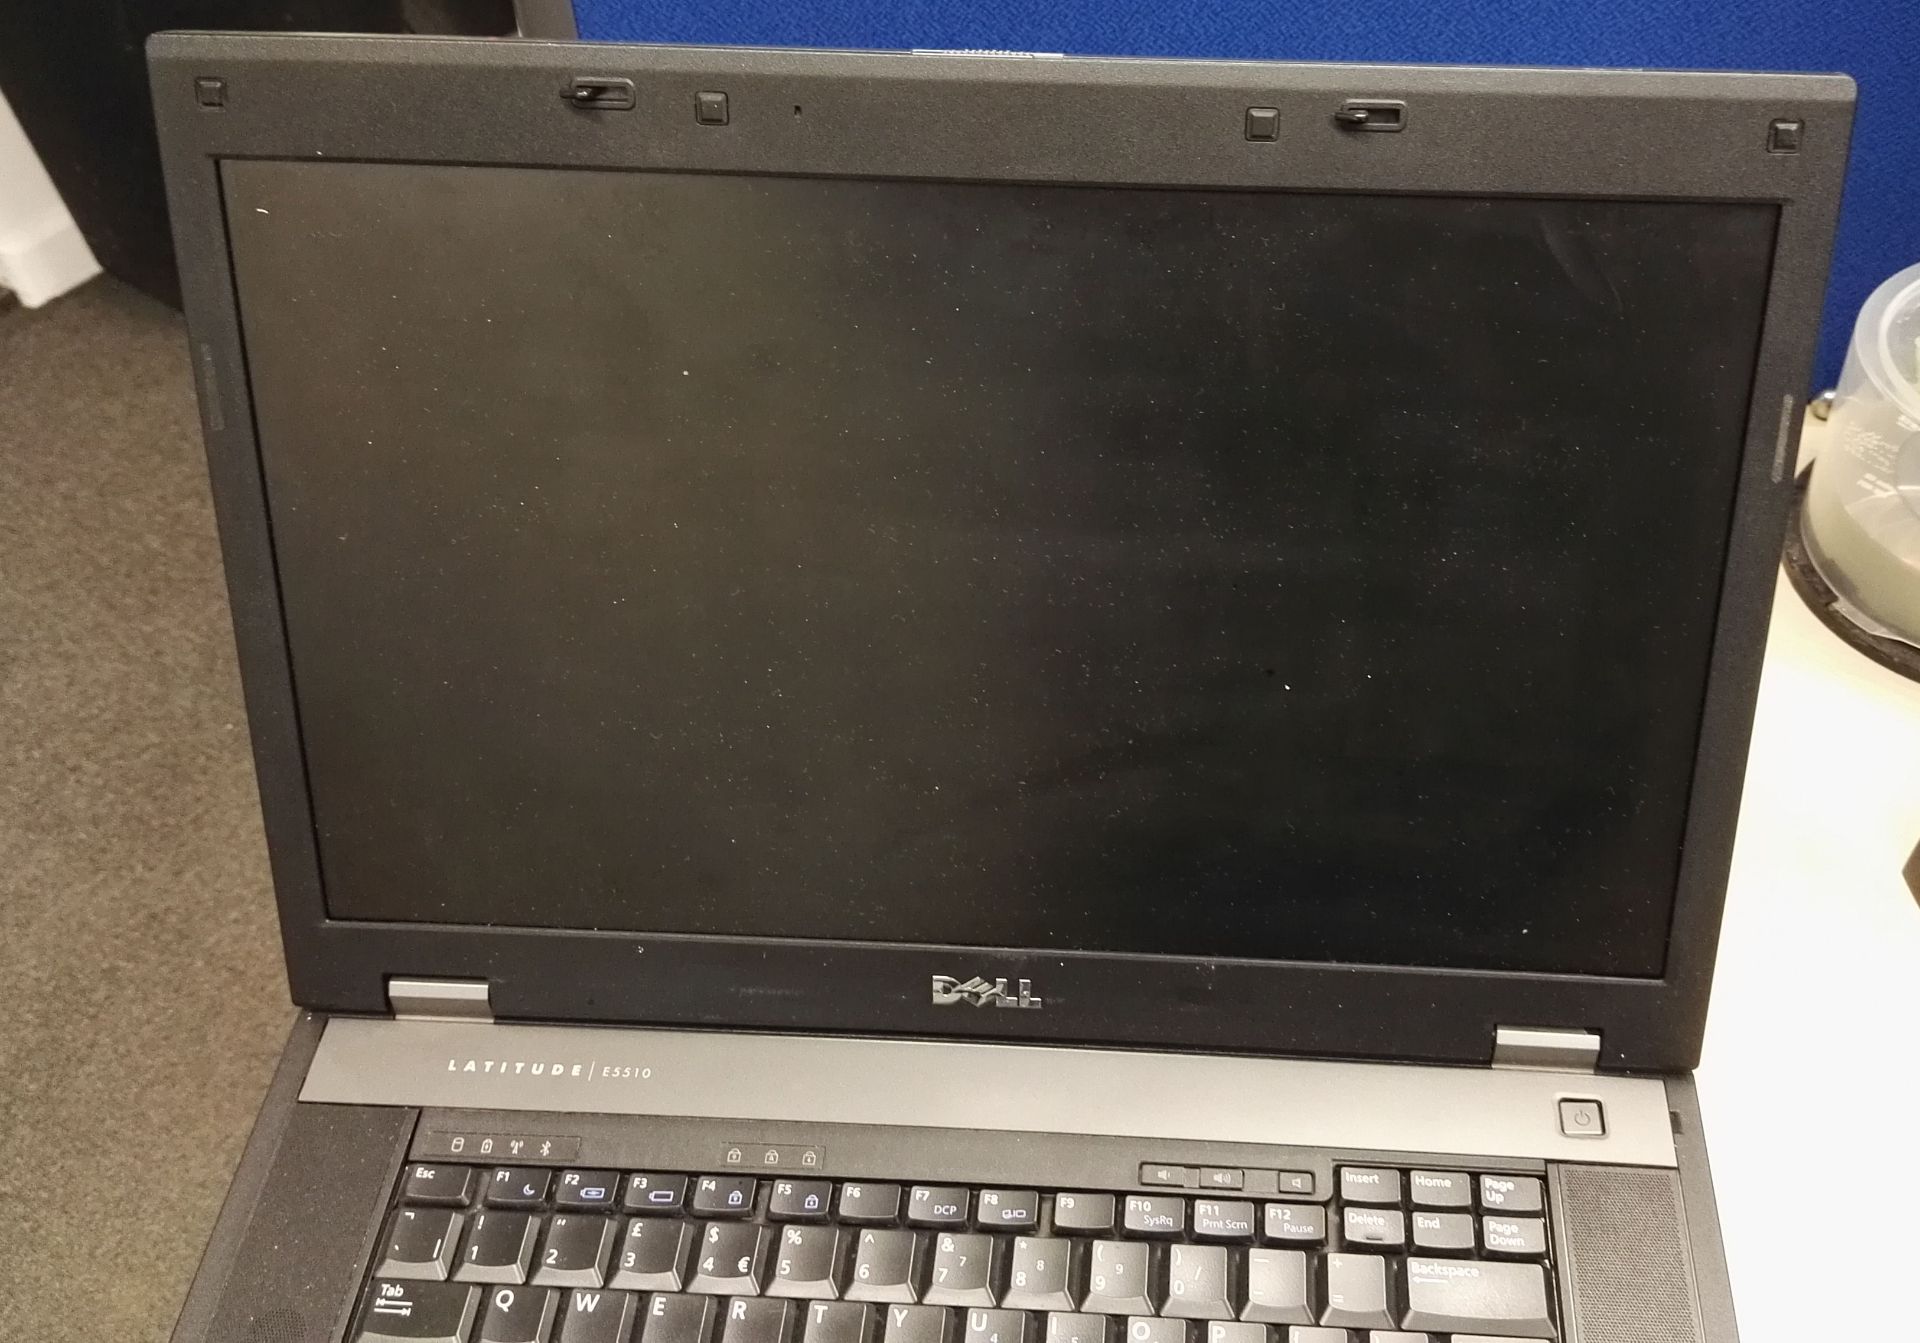 1 x Dell E5510 Latitude Laptop Computer - Features 6gb RAM, 320gb Hard Drive, Intel i5 2.4GHz - Image 8 of 16